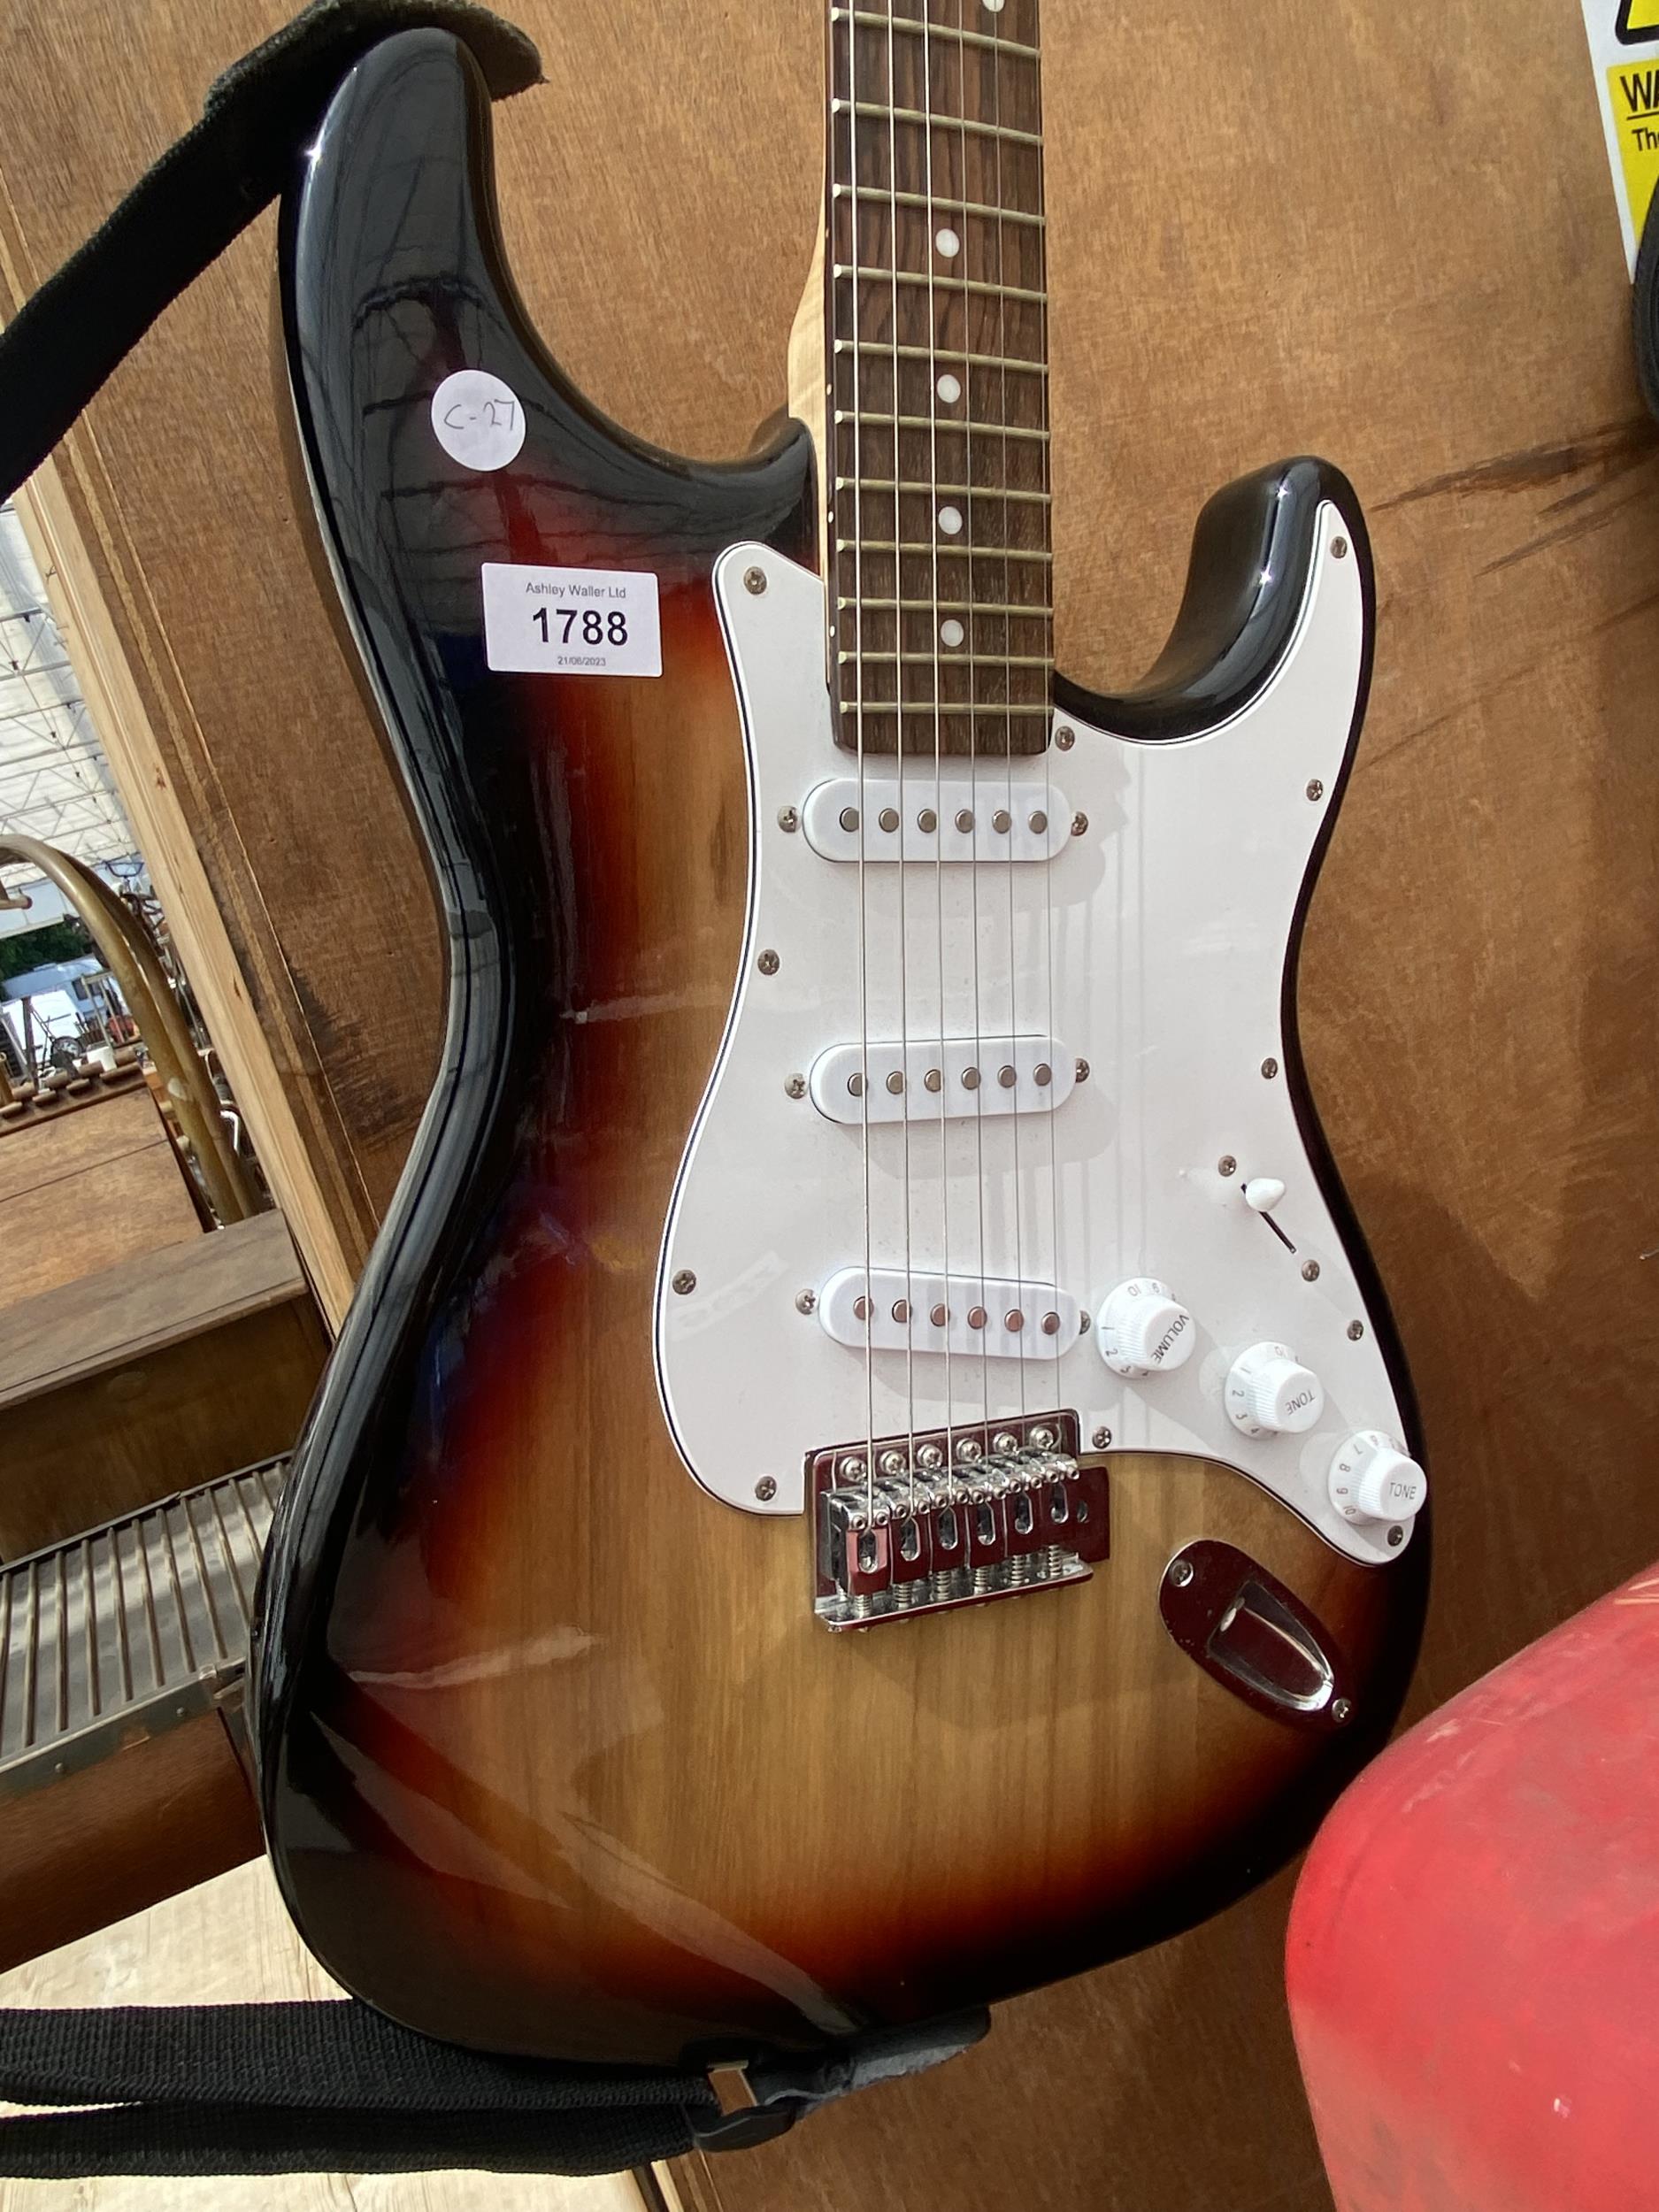 A CRUISER BY CRAFTER ELECTRIC GUITAR COMPLETE WITH CARRY CASE, PITCH PIPES AND WHAMMY BAR - Image 2 of 4